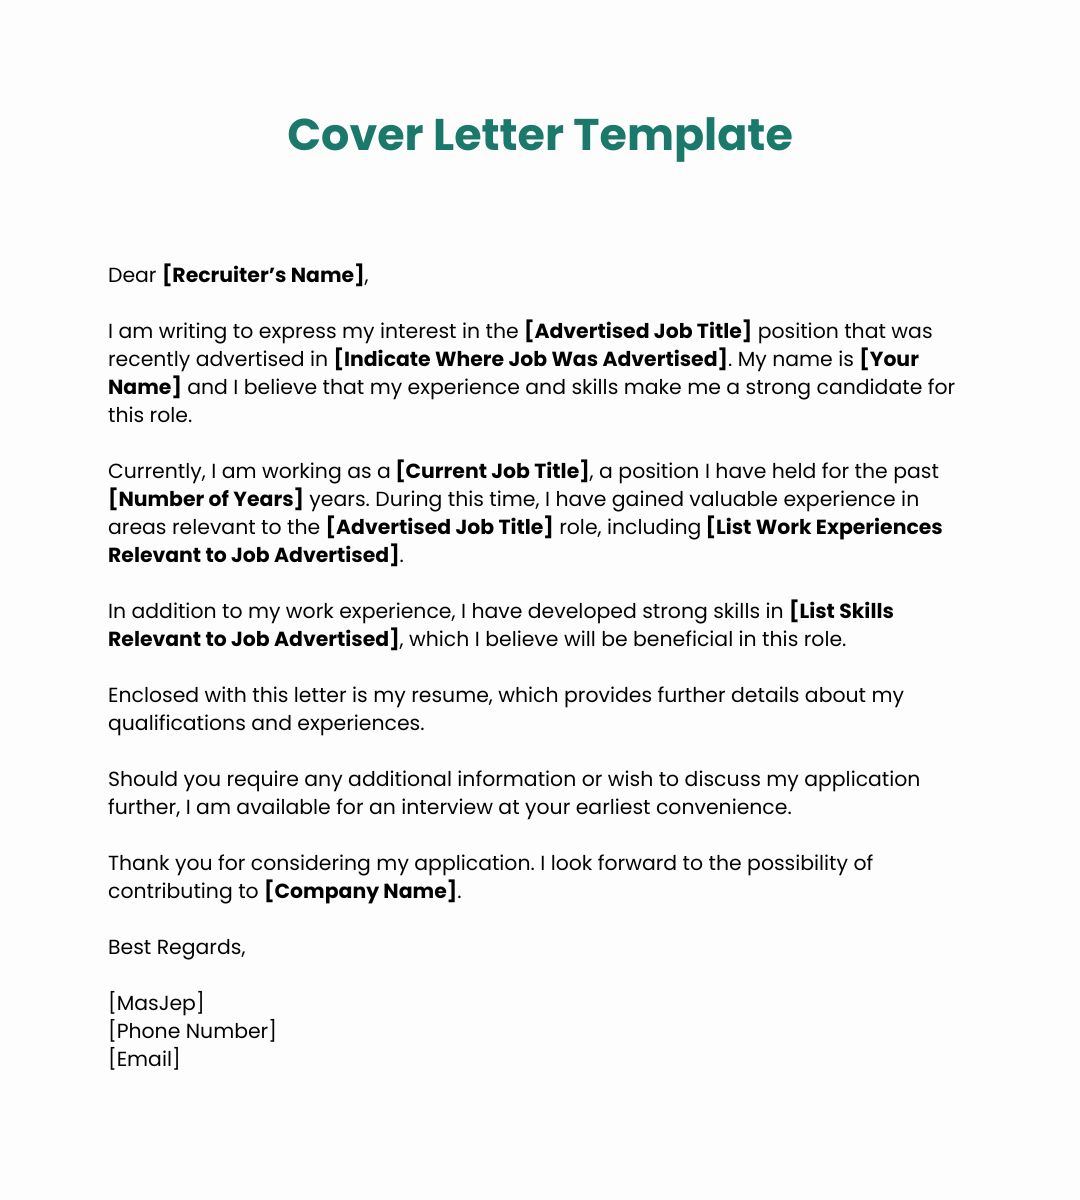 Here are some reasons why #coverletters are so important:
.
1. Stand Out From The Crowd - Your cover letter is your chance to shine and grab the attention of the hiring manager.
+